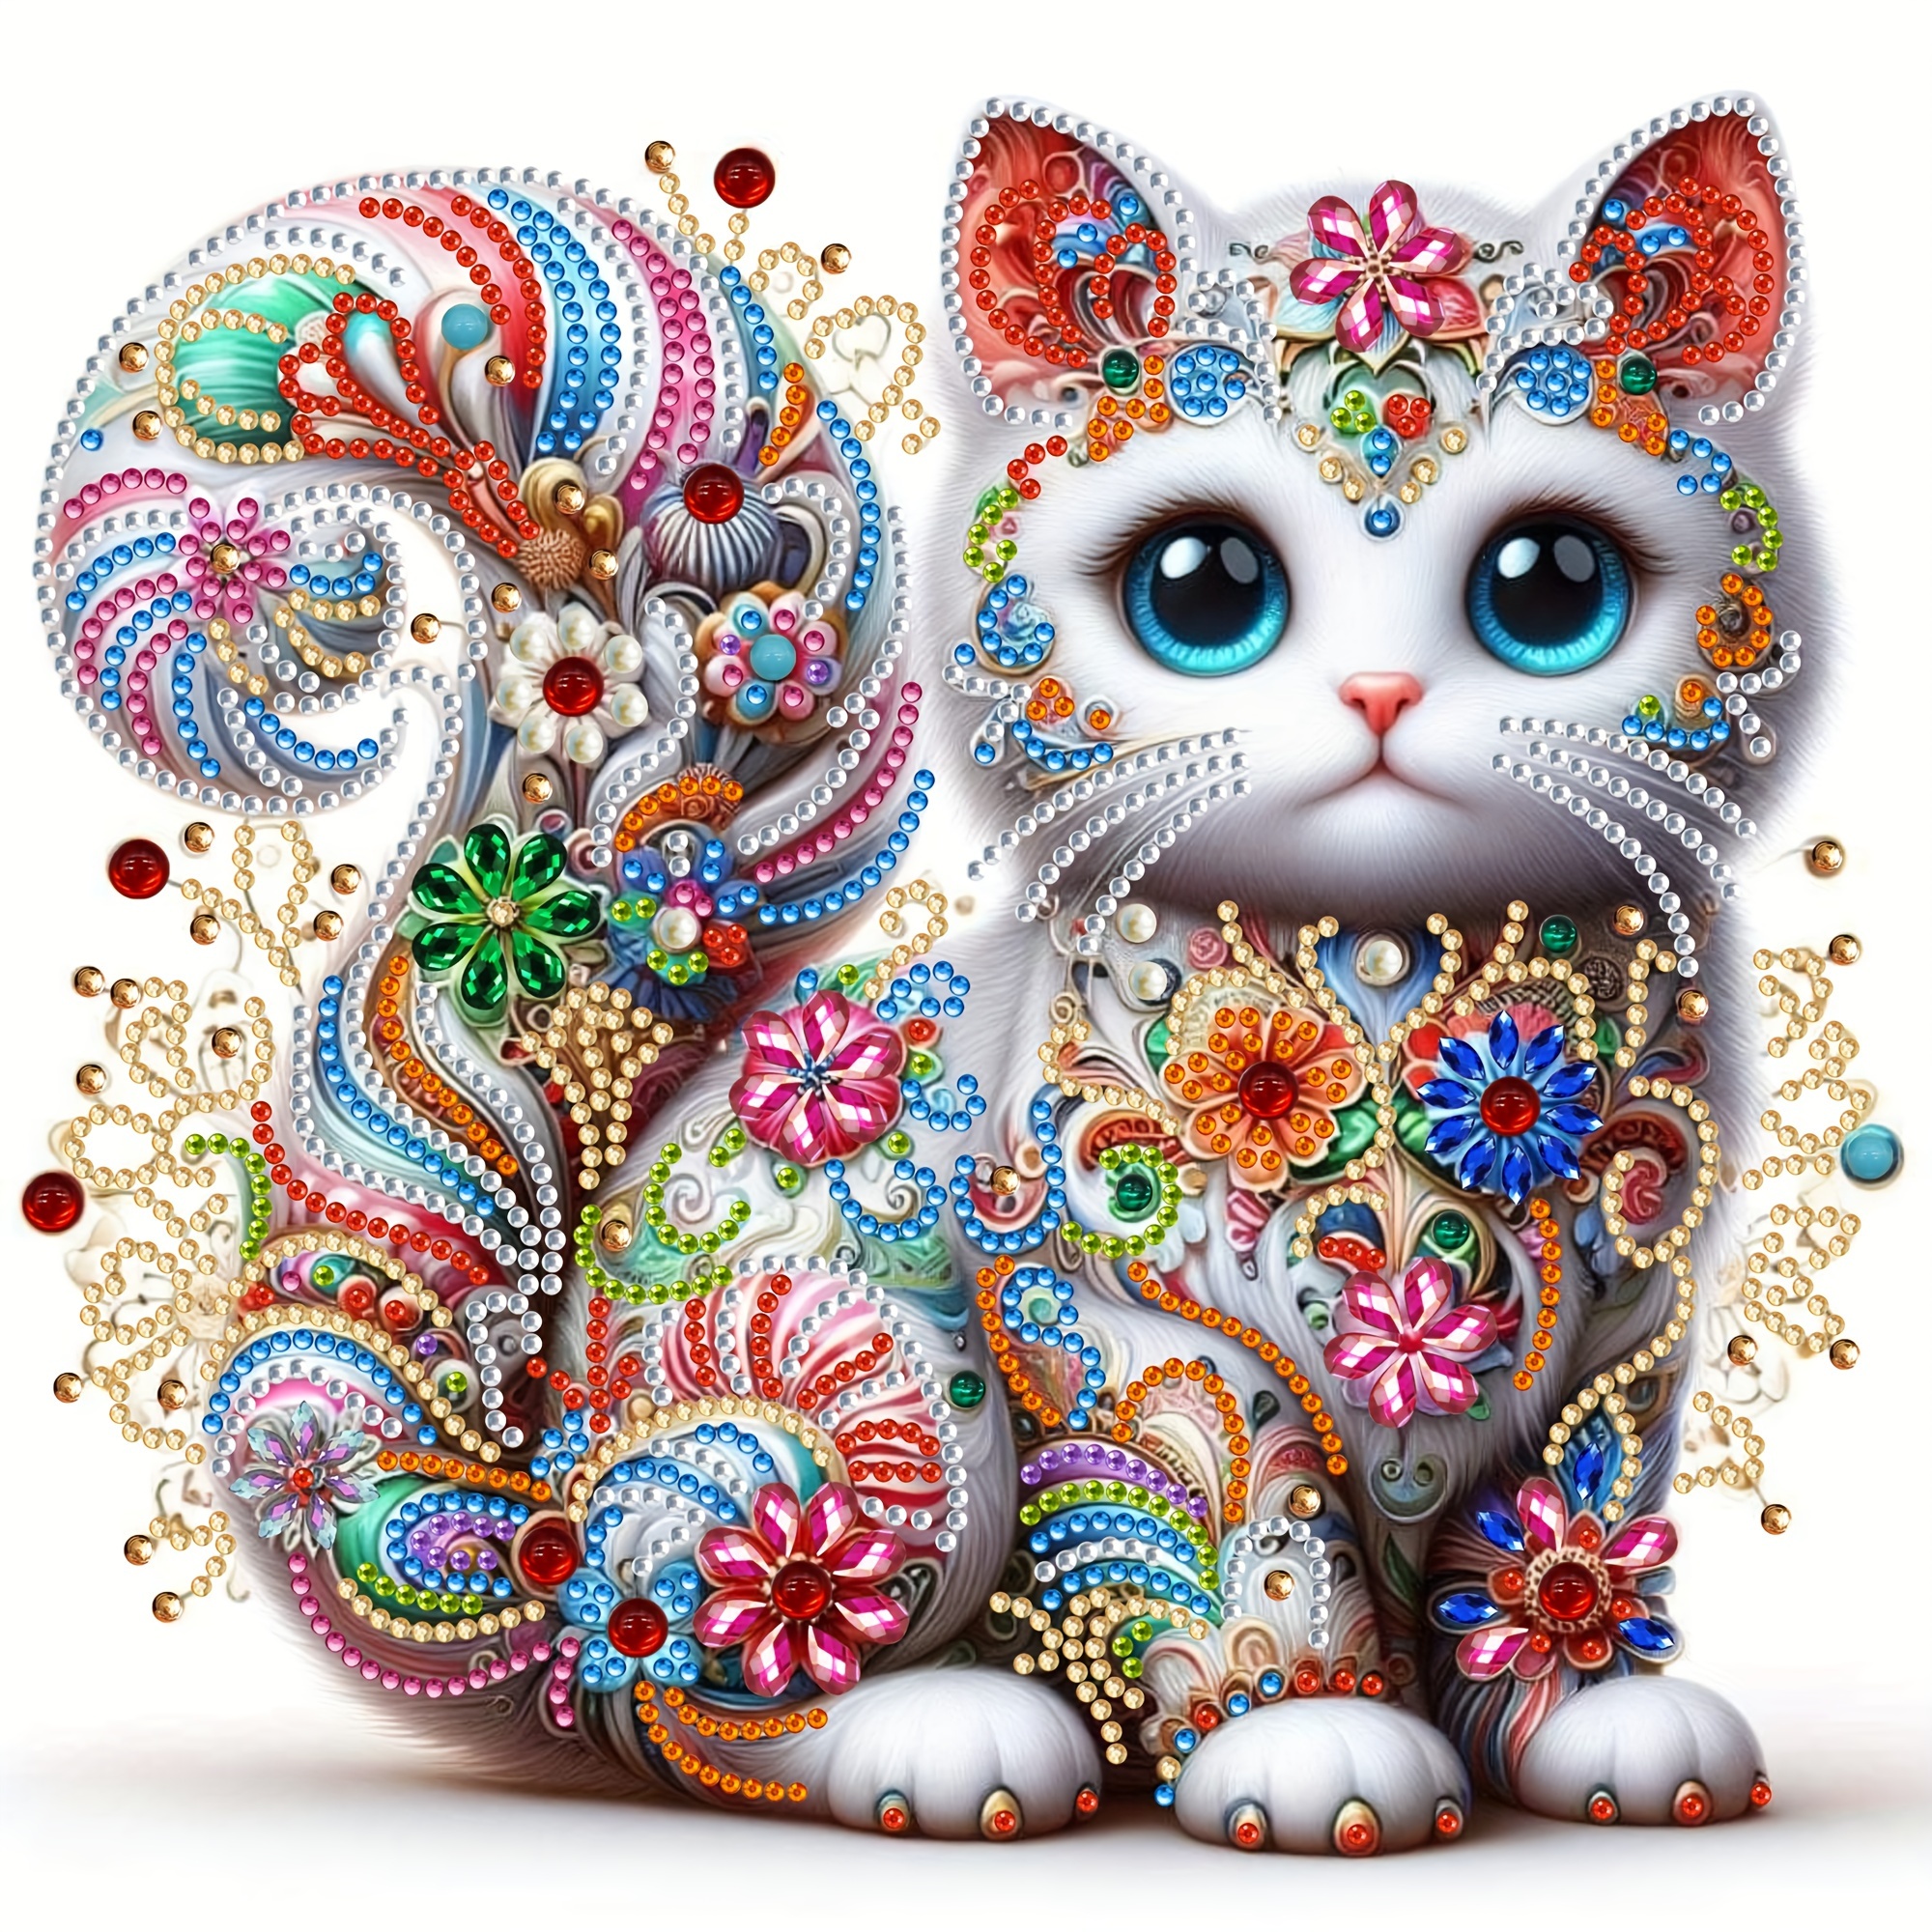 

1pc Cartoon Cat Pattern Diamond Art Painting Kit 5d Diamond Art Set Painting With Diamond Gems, Arts And Crafts For Home Wall Decor. No Frame (30x30cm/11.8x11.8in)